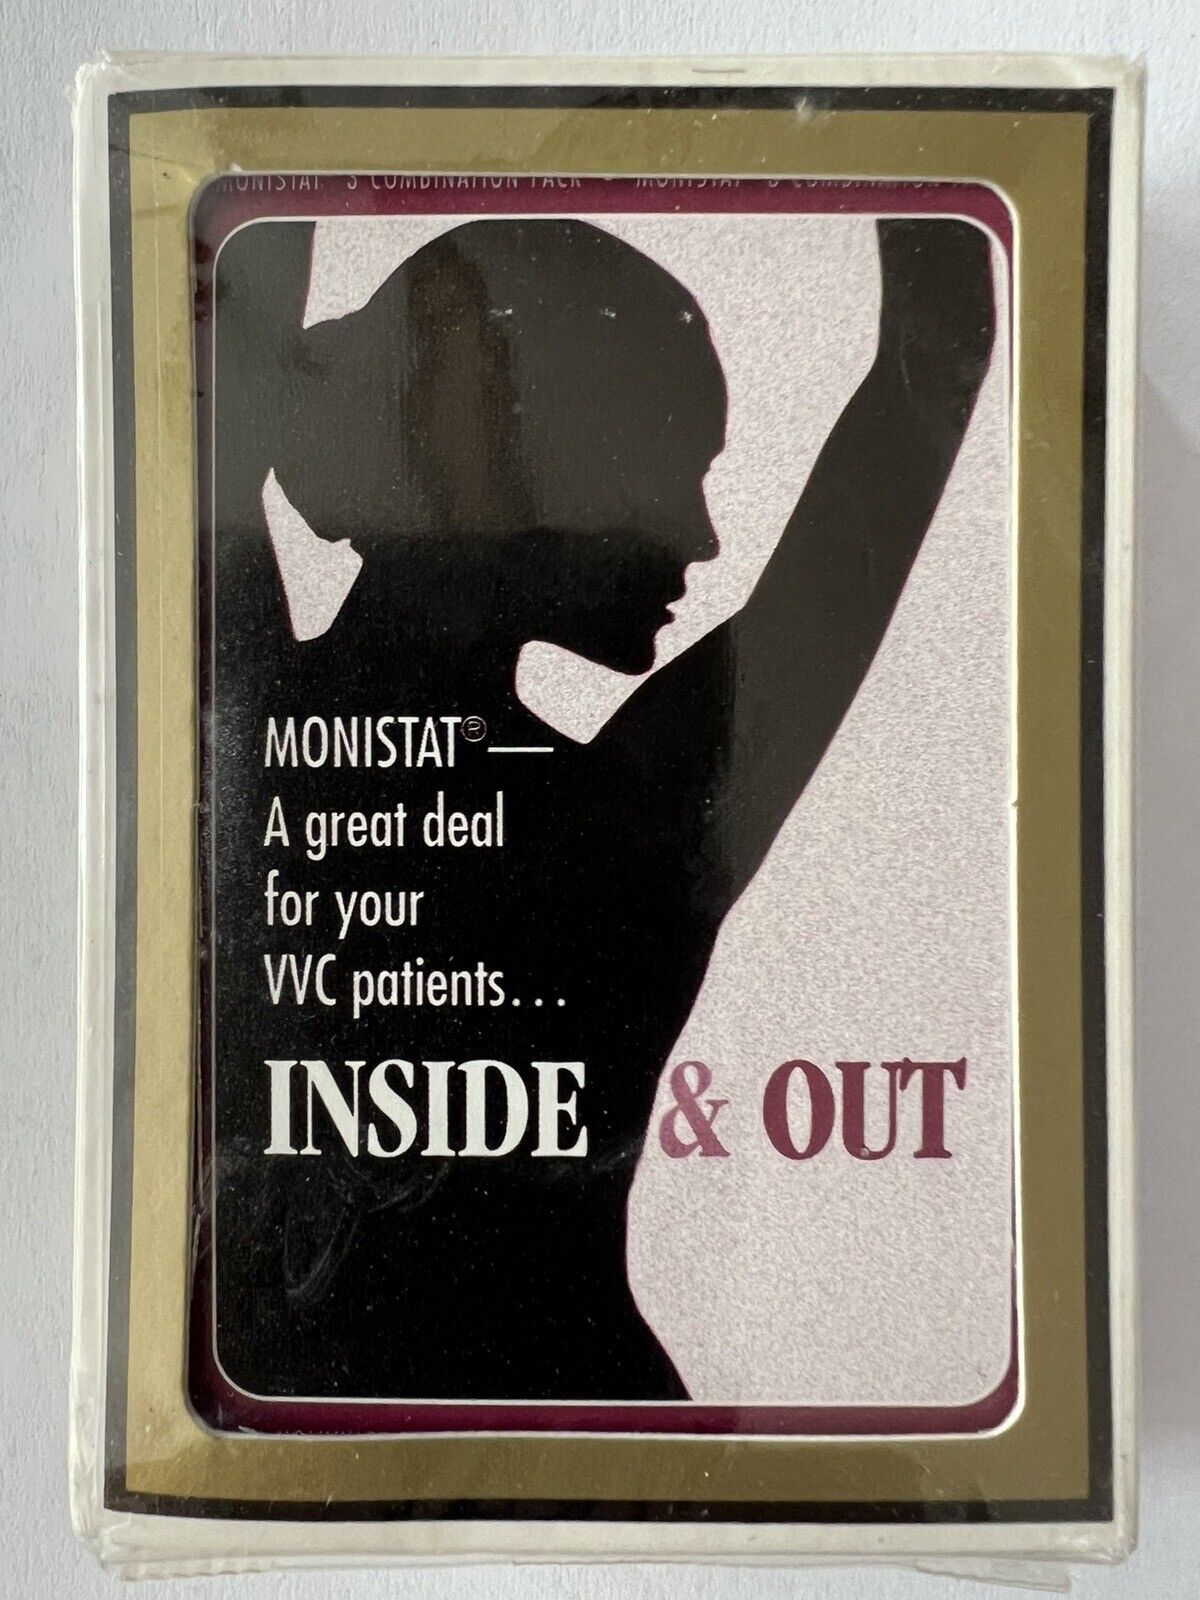 MONISTAT INSIDE & OUT DECK OF PLASTIC COATED PLAYING CARDS  NEW